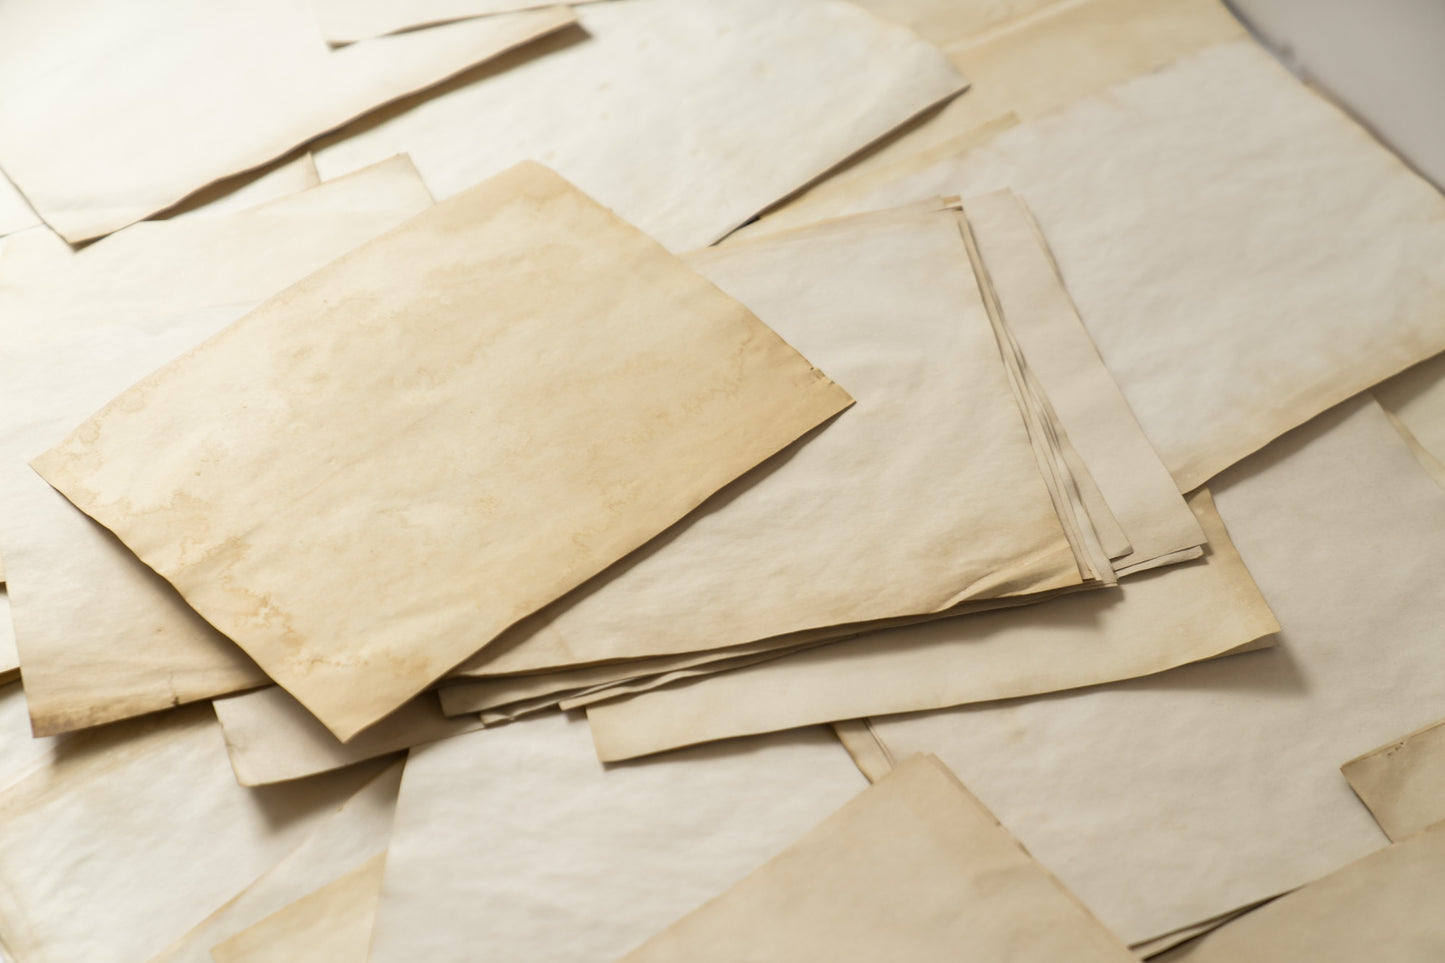 Artisanal Grungy Coffee Dyed Paper